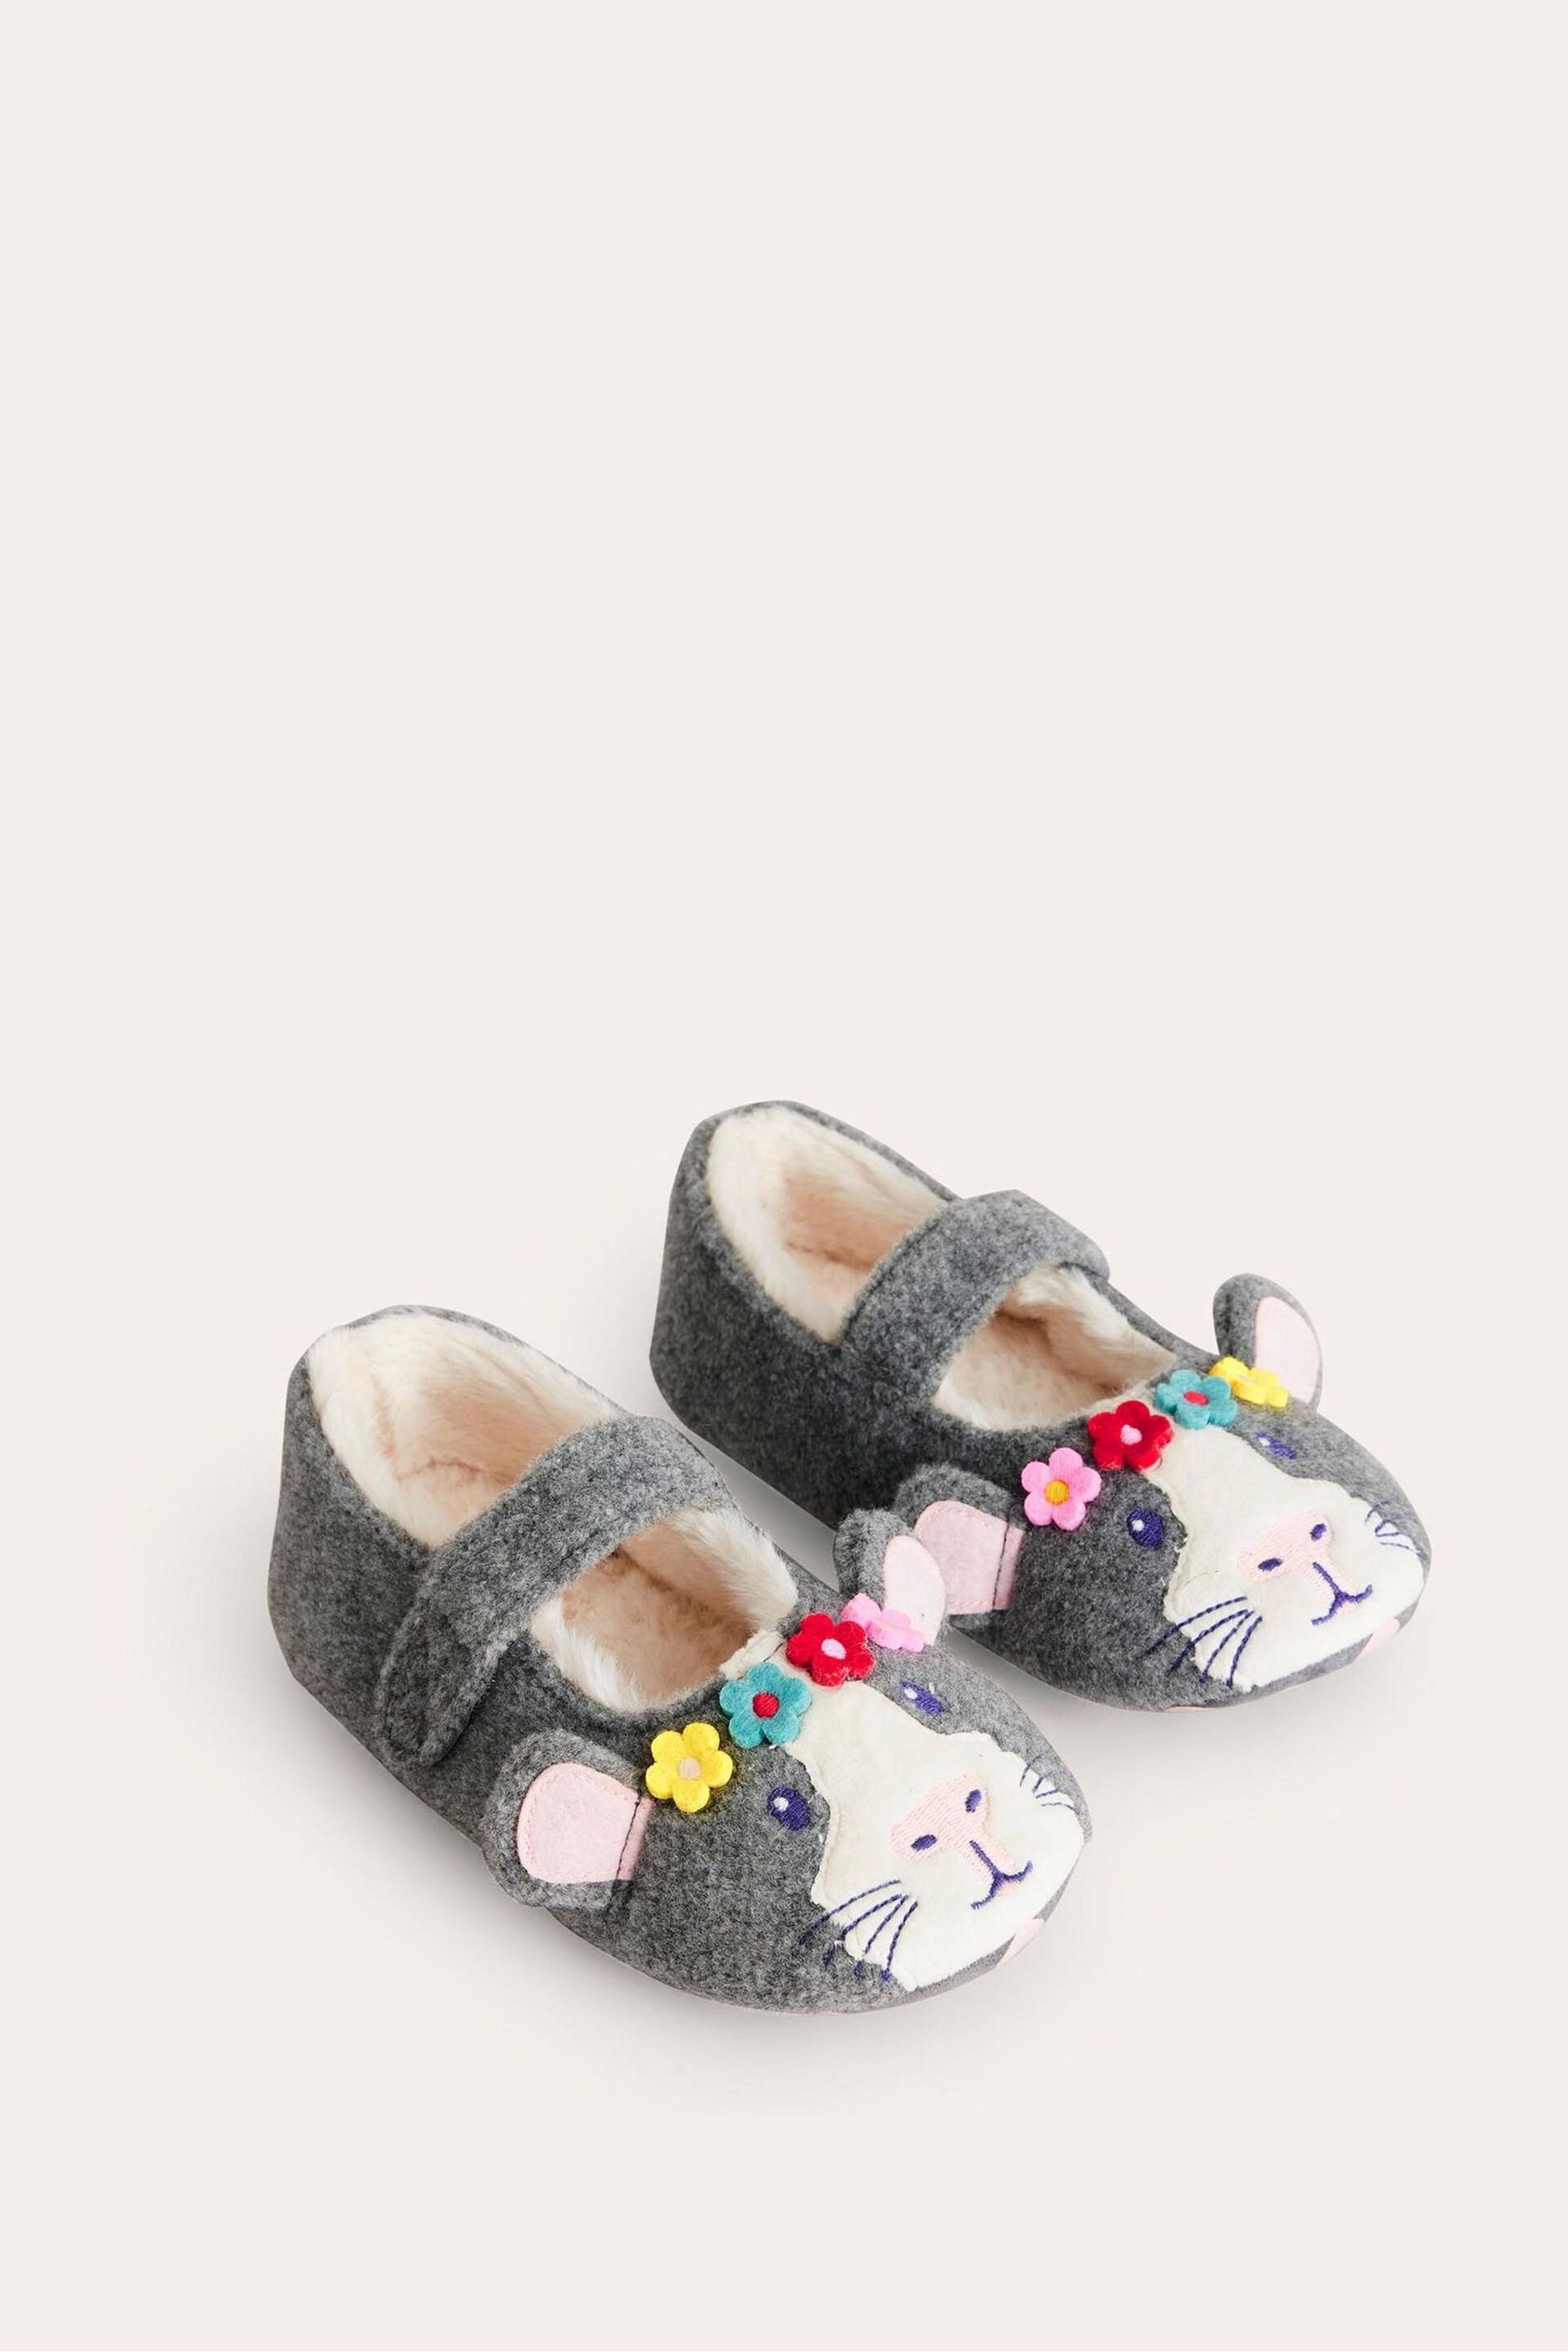 Boden Grey Guinea Pig Slippers - Image 1 of 3